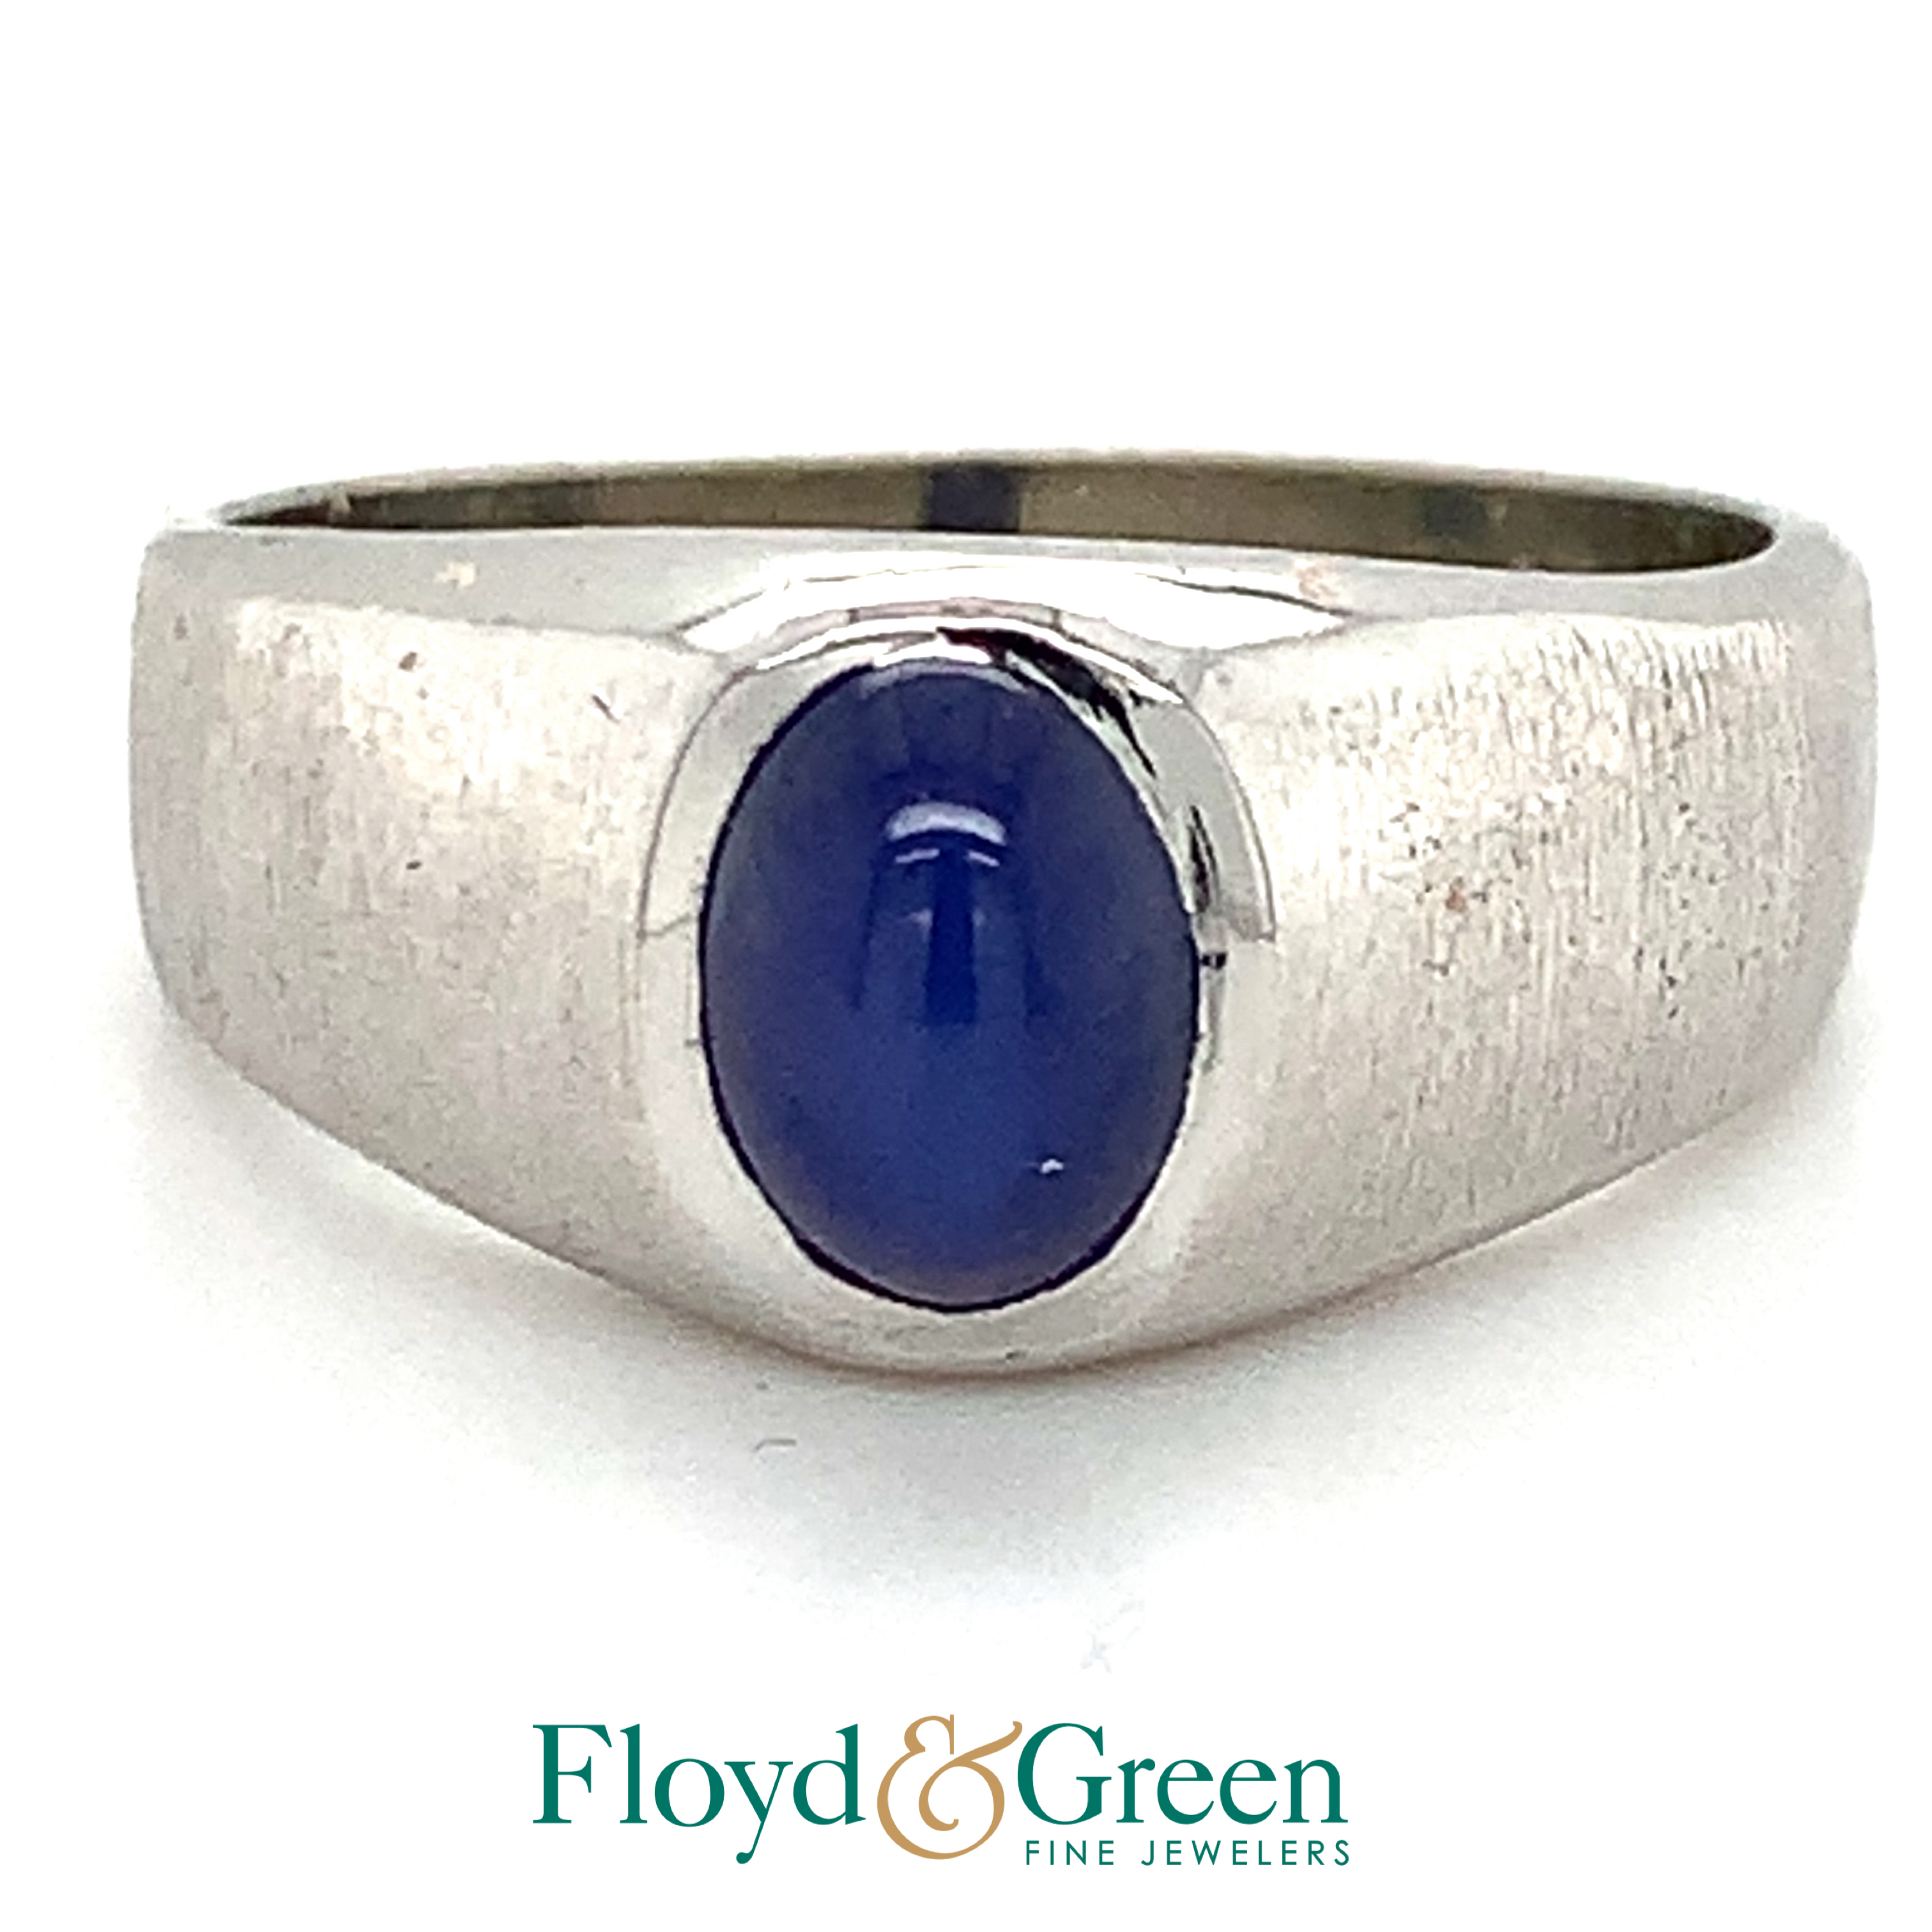 Solitaire Cabochon Sapphire Ring